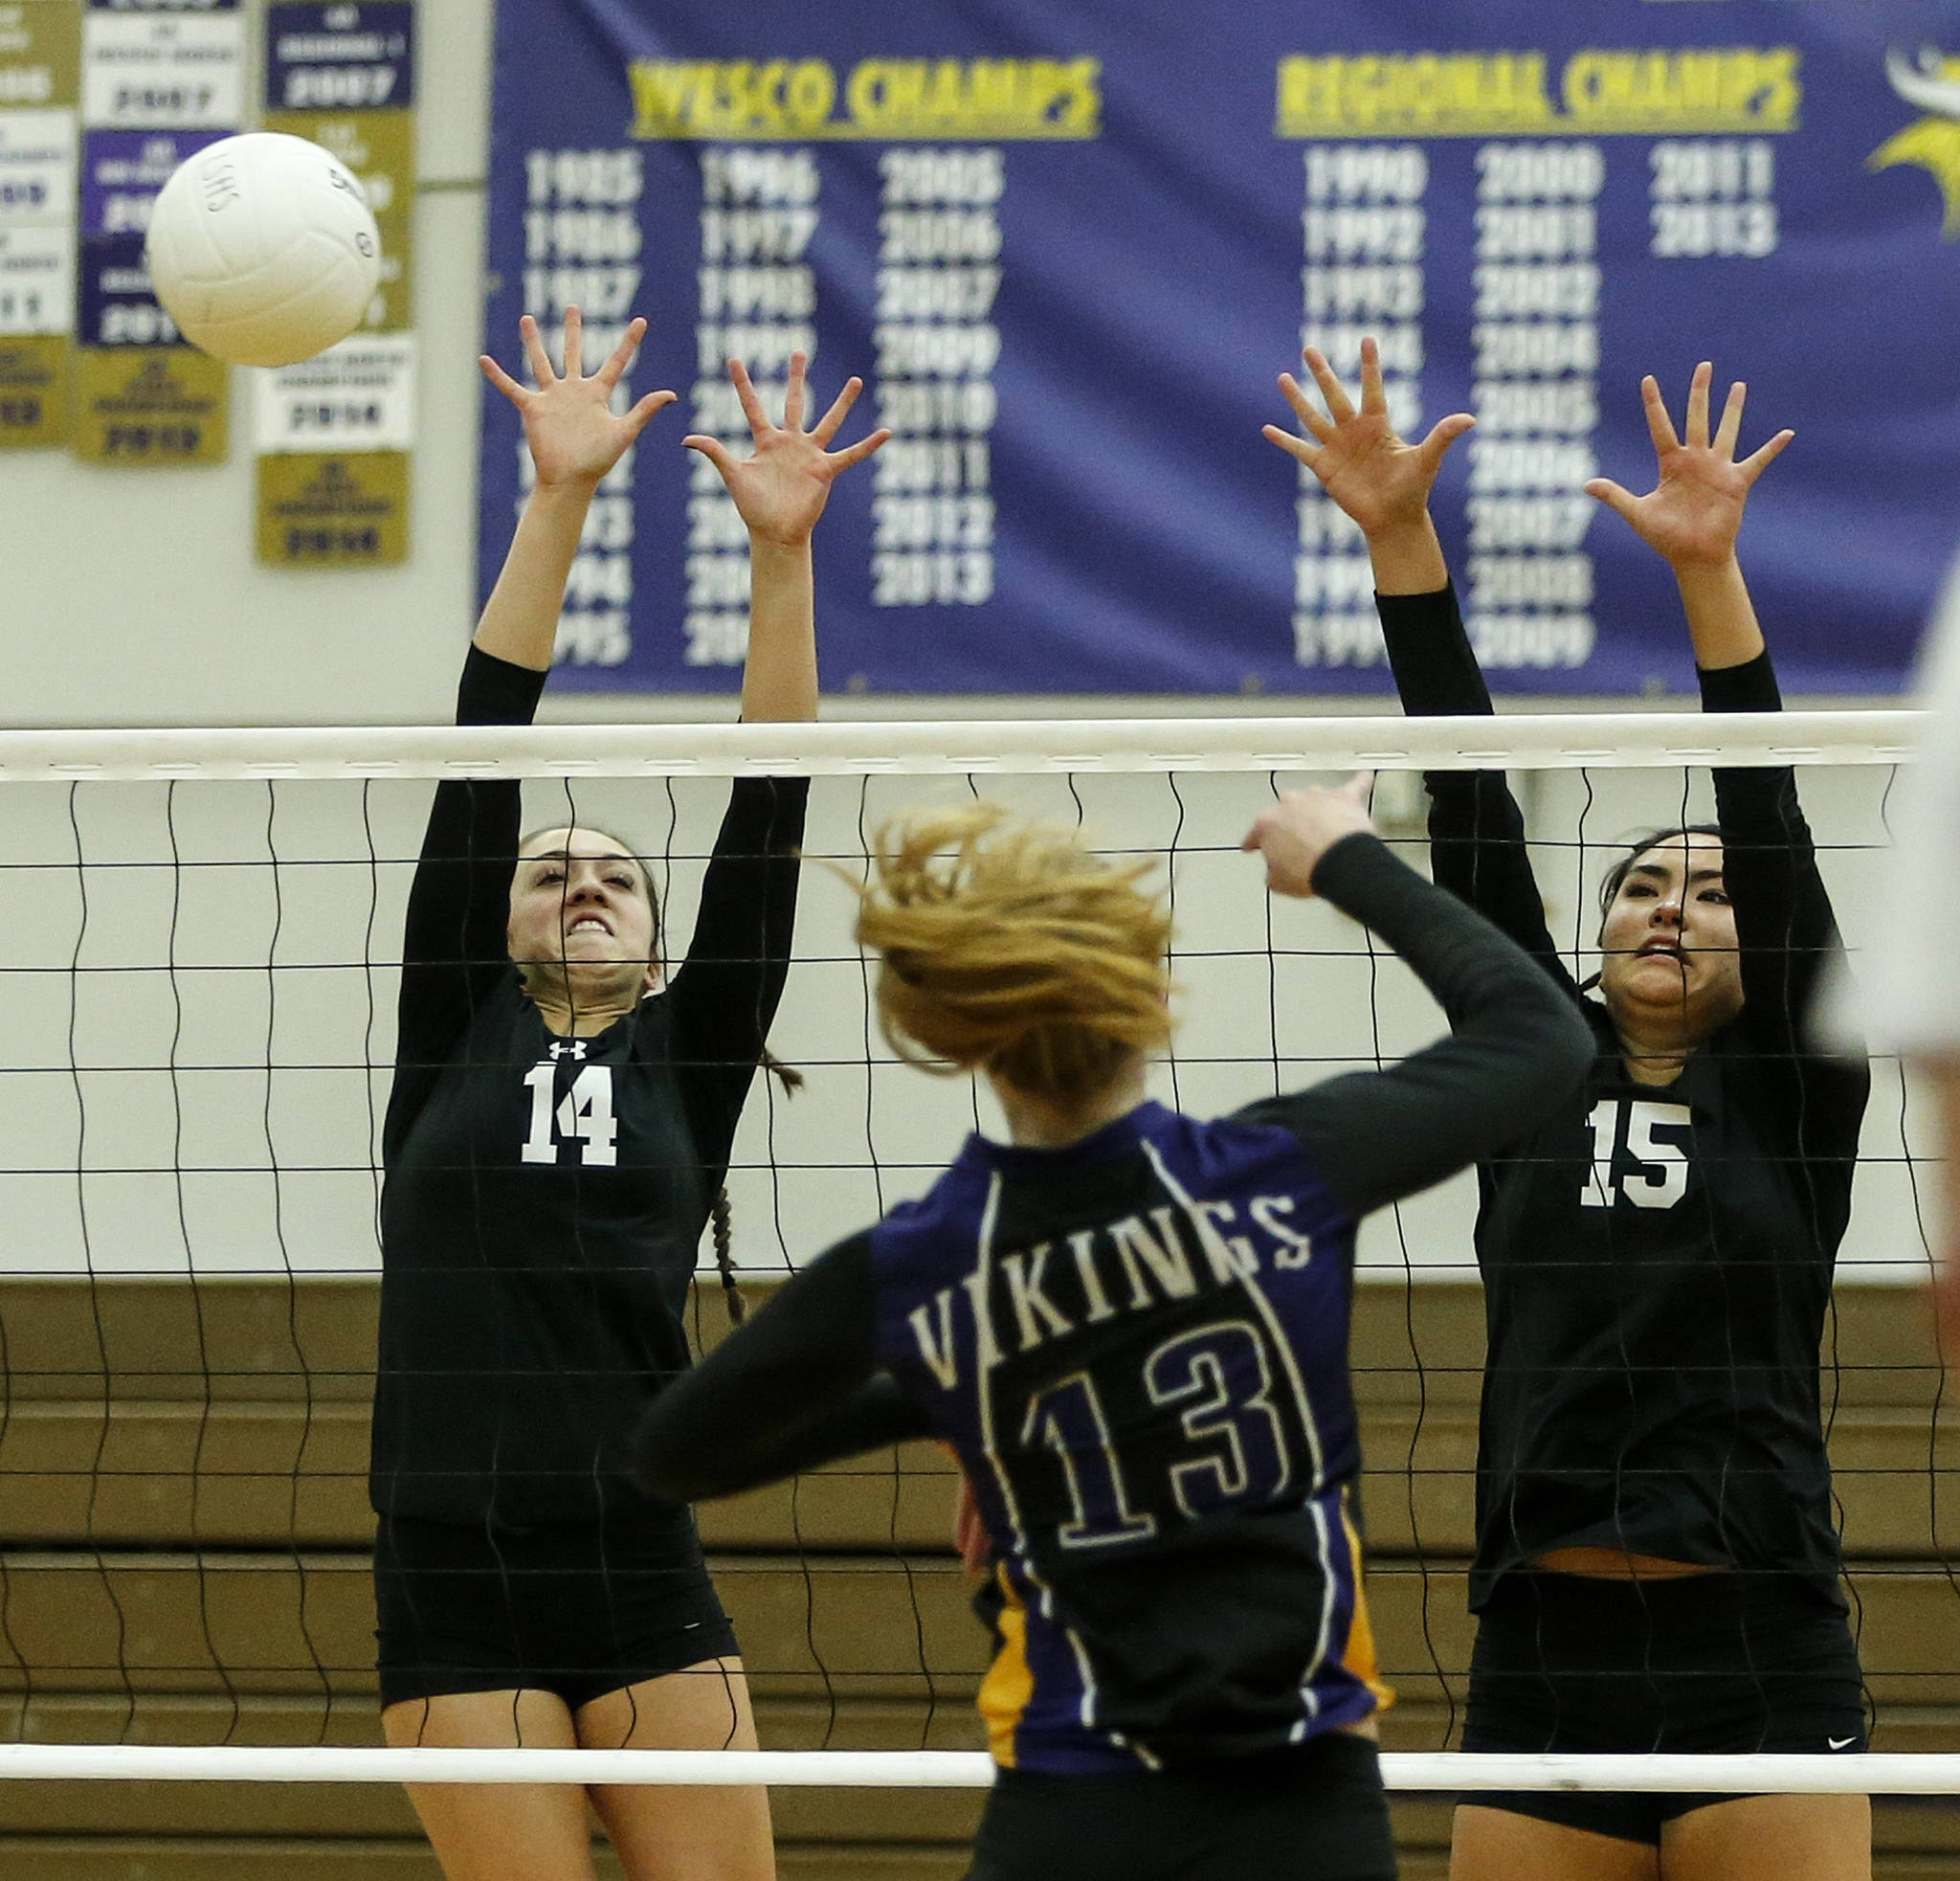 Kamiak’s Grace Forster (14) and Jaclyn Janczakowski (15) go up for a block against Lake Stevens’ Hayley Muir (13) during a game on Oct. 10, 2017, at Lake Stevens High School. (Ian Terry / The Herald)